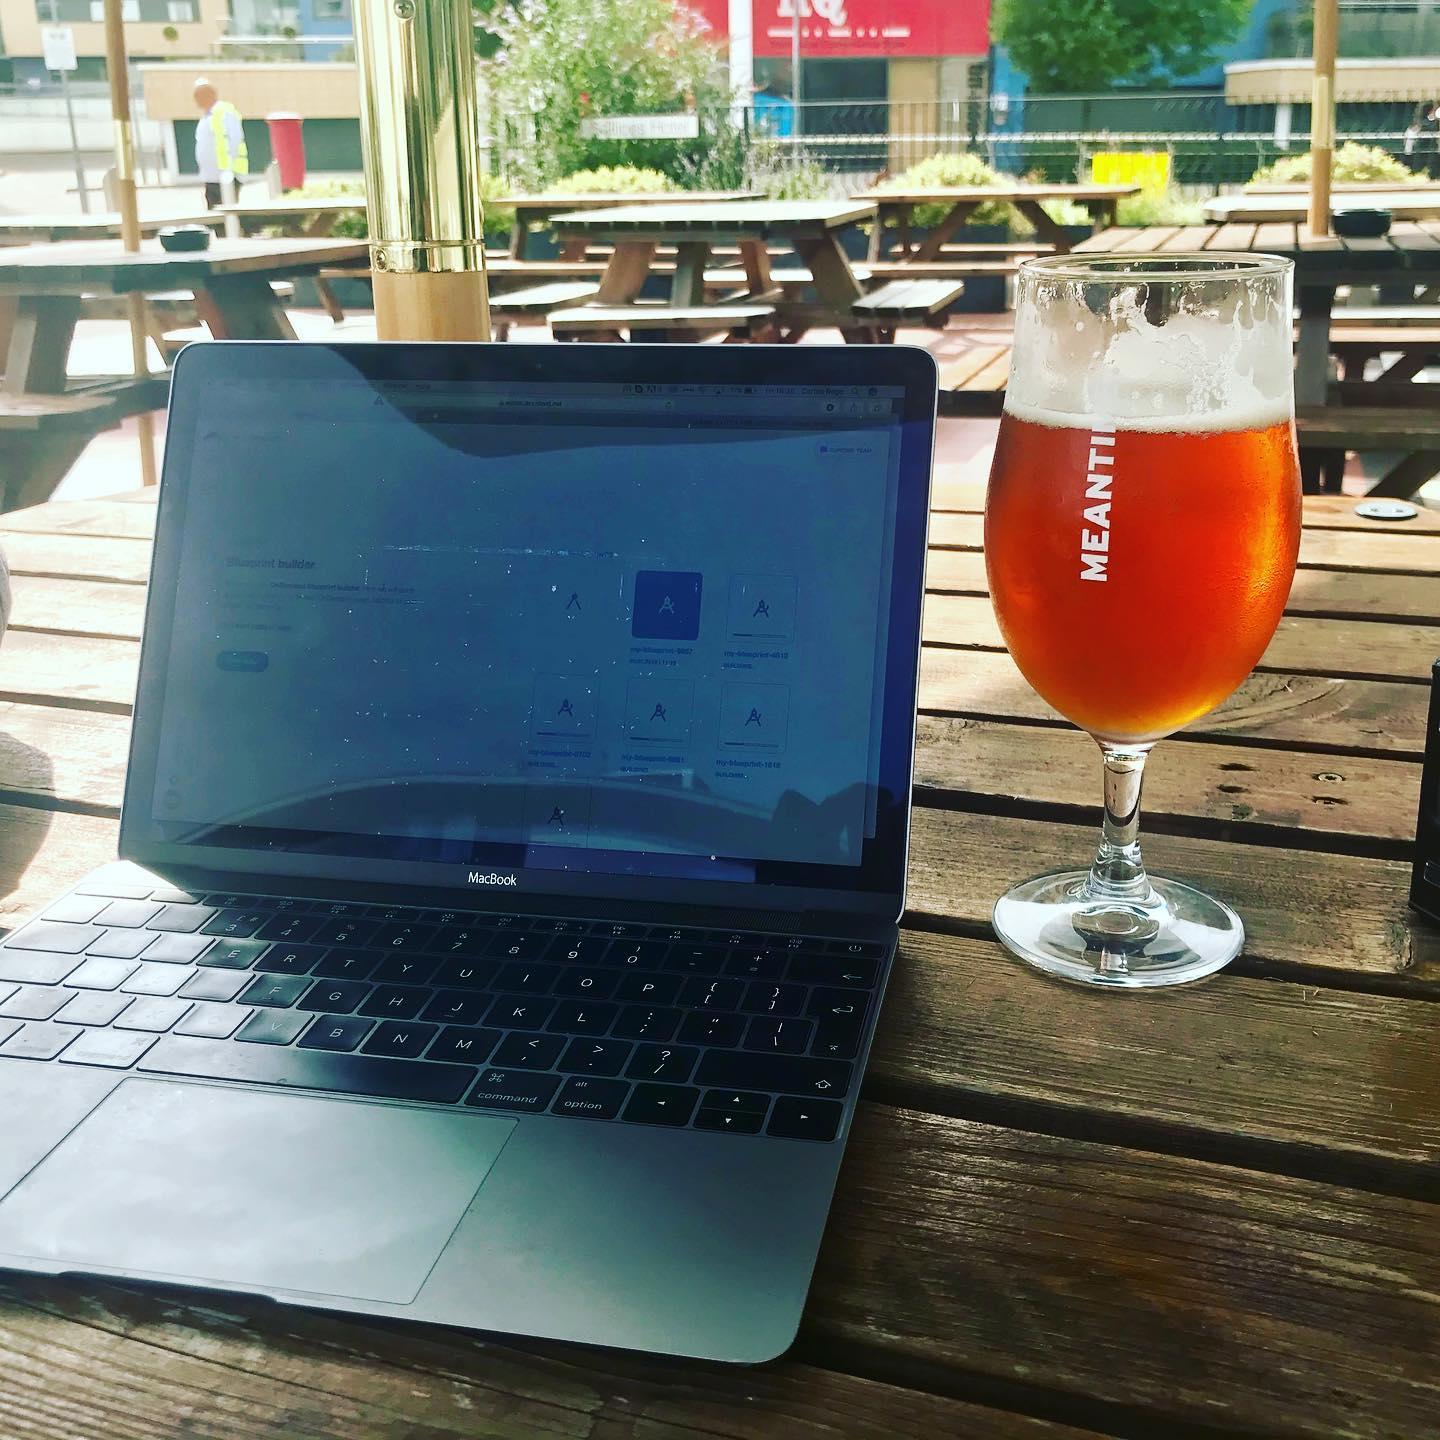 Early day out of the office due to board meeting, so taking advantage of the nice weather to work at the pub with the sun shining